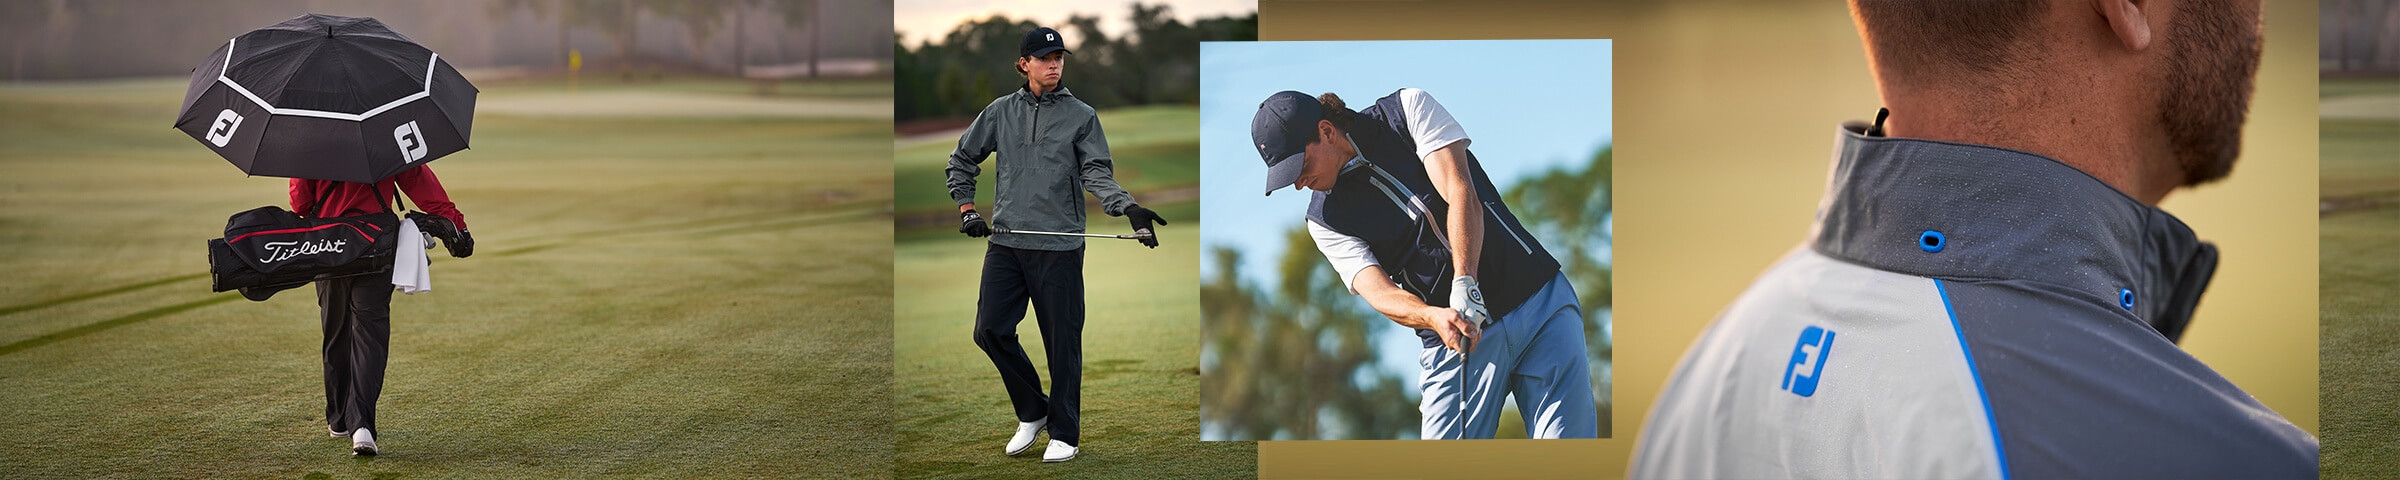 FootJoy Men's Golf Outer Layers